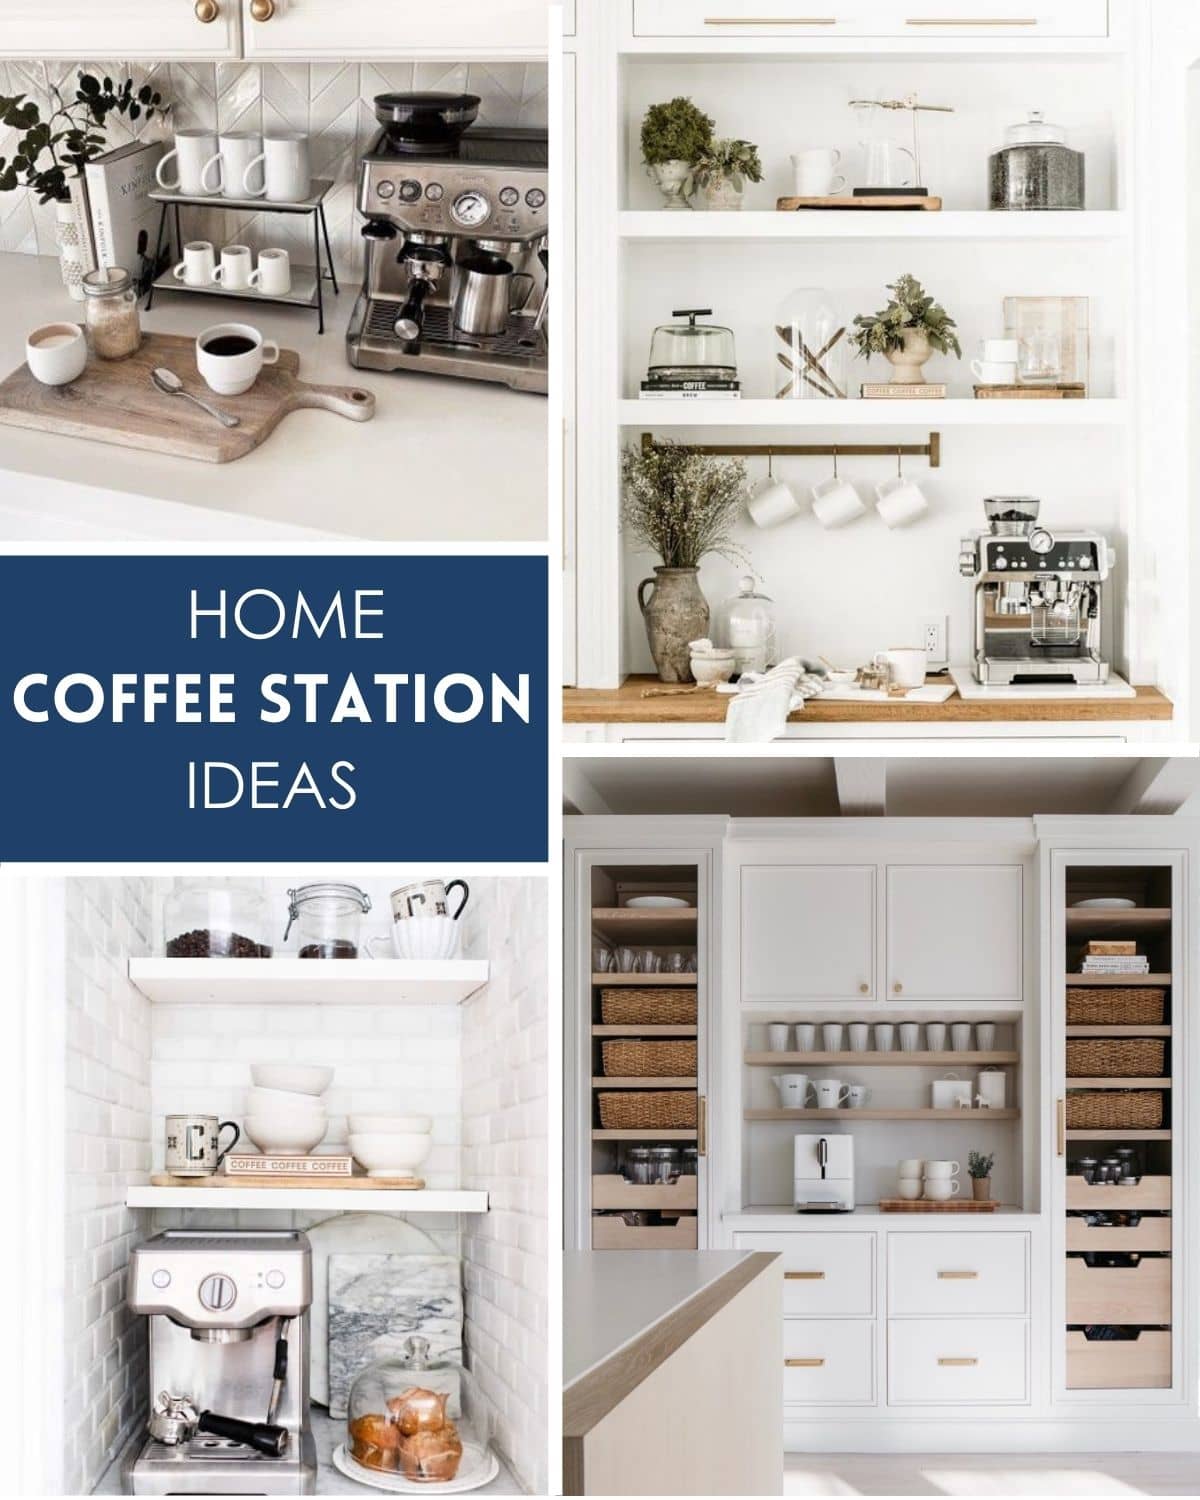 examples of coffee bar ideas in kitchens on counters, floating shelves, and in cabinets